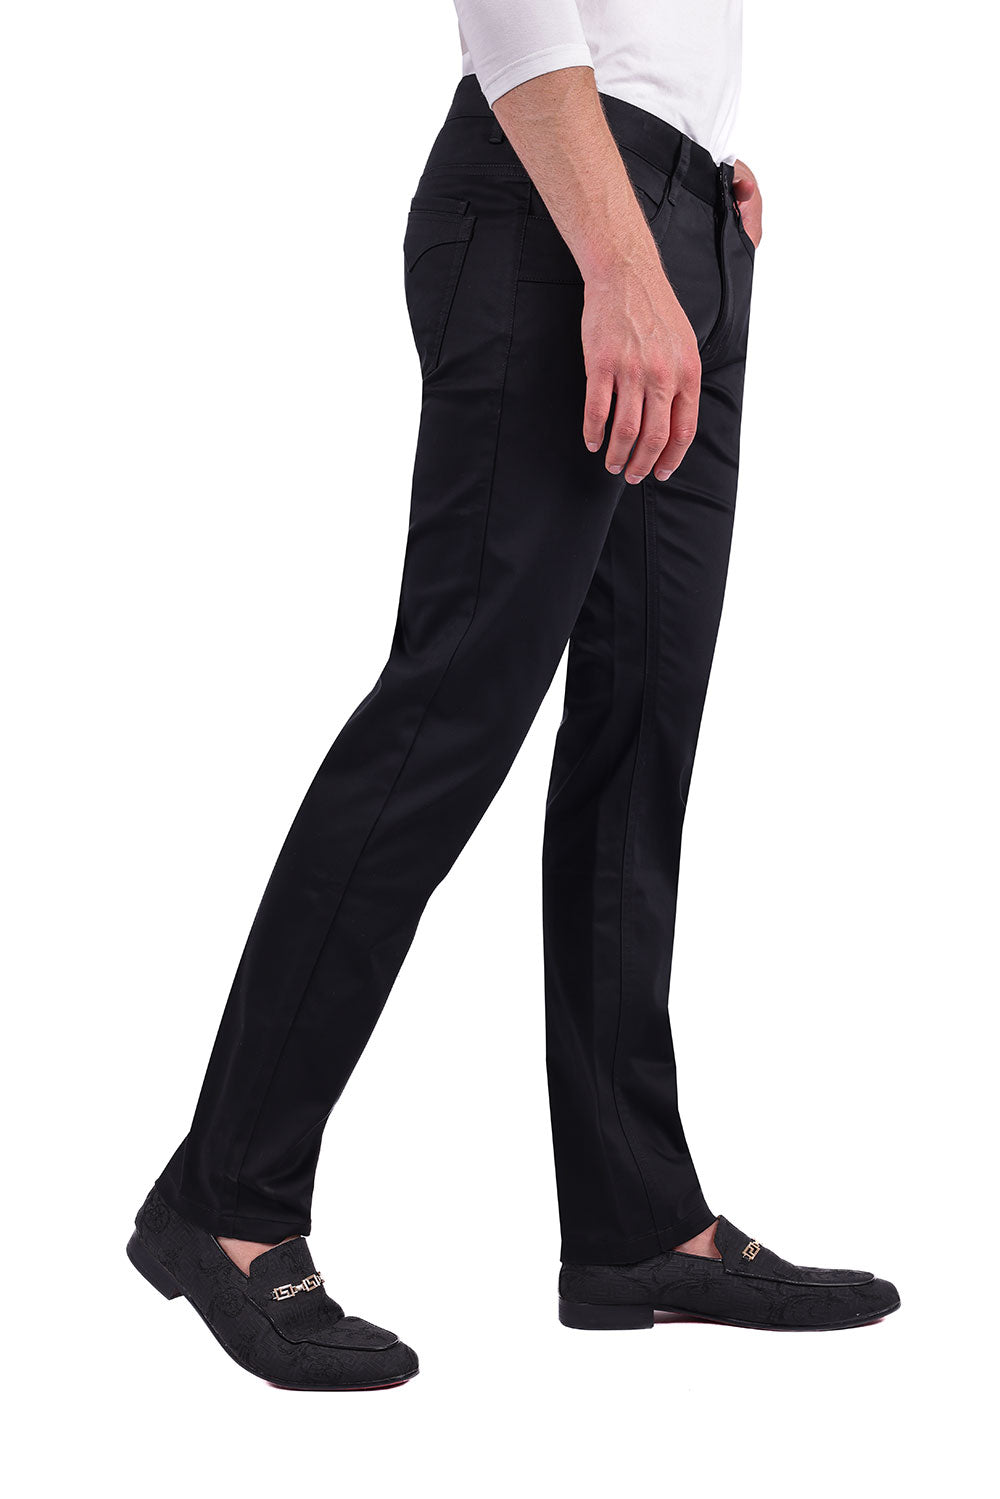 Barabas Men's Solid Color Basic Essential Chino Dress Pants 3CPW31 Black